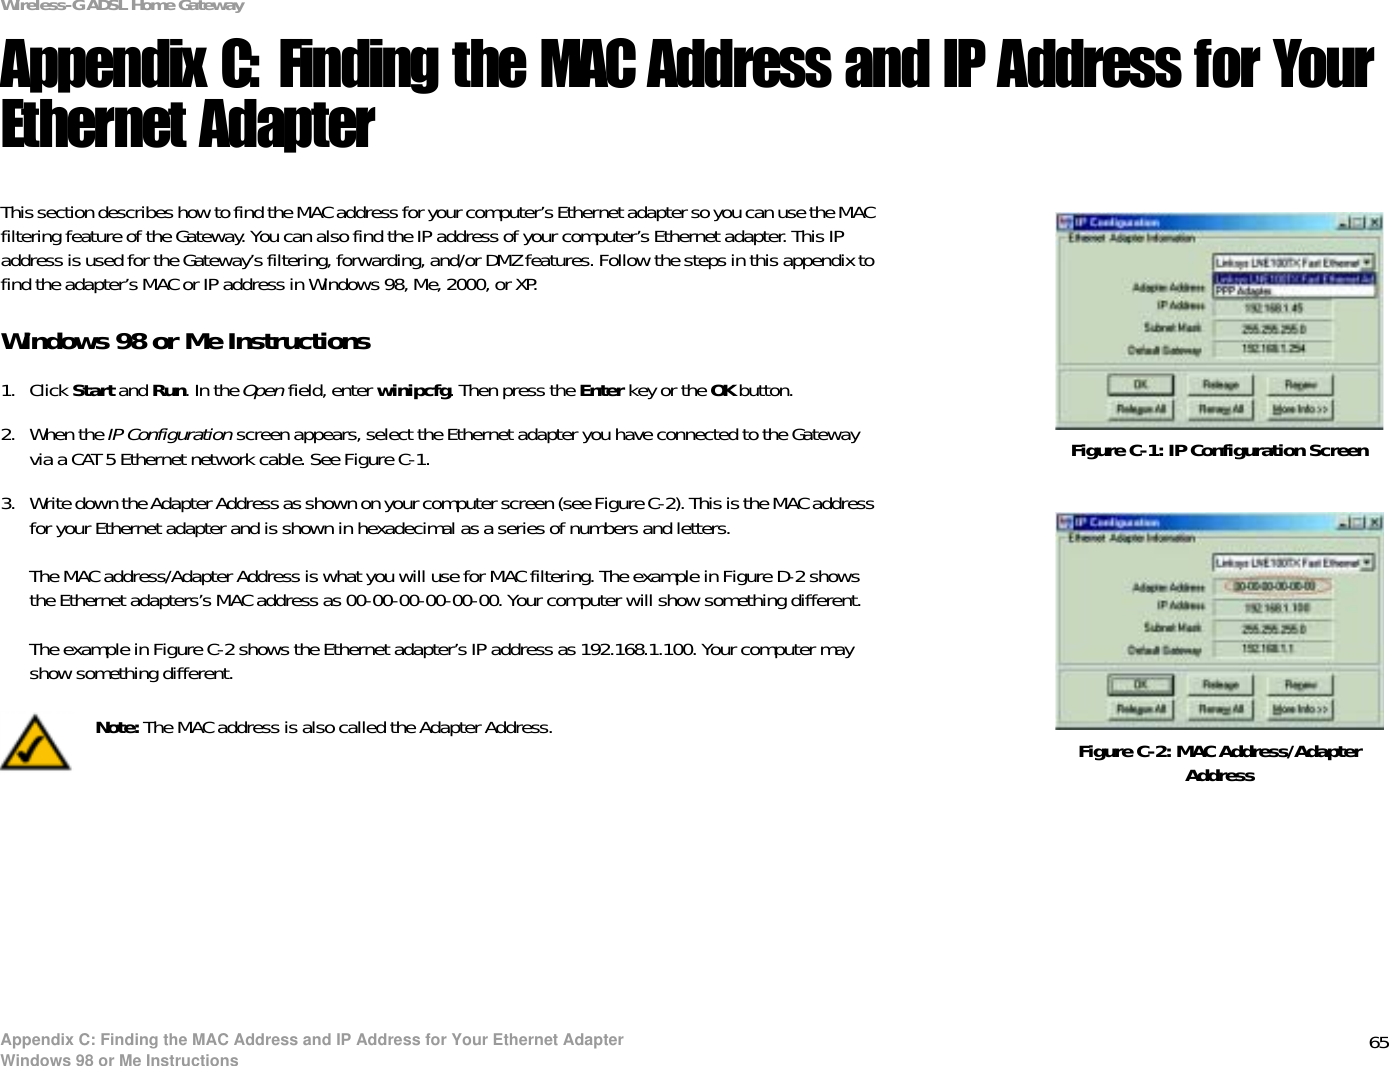 65Appendix C: Finding the MAC Address and IP Address for Your Ethernet AdapterWindows 98 or Me InstructionsWireless-G ADSL Home GatewayAppendix C: Finding the MAC Address and IP Address for Your Ethernet AdapterThis section describes how to find the MAC address for your computer’s Ethernet adapter so you can use the MAC filtering feature of the Gateway. You can also find the IP address of your computer’s Ethernet adapter. This IP address is used for the Gateway’s filtering, forwarding, and/or DMZ features. Follow the steps in this appendix to find the adapter’s MAC or IP address in Windows 98, Me, 2000, or XP.Windows 98 or Me Instructions1. Click Start and Run. In the Open field, enter winipcfg. Then press the Enter key or the OK button. 2. When the IP Configuration screen appears, select the Ethernet adapter you have connected to the Gateway via a CAT 5 Ethernet network cable. See Figure C-1.3. Write down the Adapter Address as shown on your computer screen (see Figure C-2). This is the MAC address for your Ethernet adapter and is shown in hexadecimal as a series of numbers and letters.The MAC address/Adapter Address is what you will use for MAC filtering. The example in Figure D-2 shows the Ethernet adapters’s MAC address as 00-00-00-00-00-00. Your computer will show something different.The example in Figure C-2 shows the Ethernet adapter’s IP address as 192.168.1.100. Your computer may show something different.Figure C-2: MAC Address/Adapter AddressFigure C-1: IP Configuration ScreenNote: The MAC address is also called the Adapter Address.